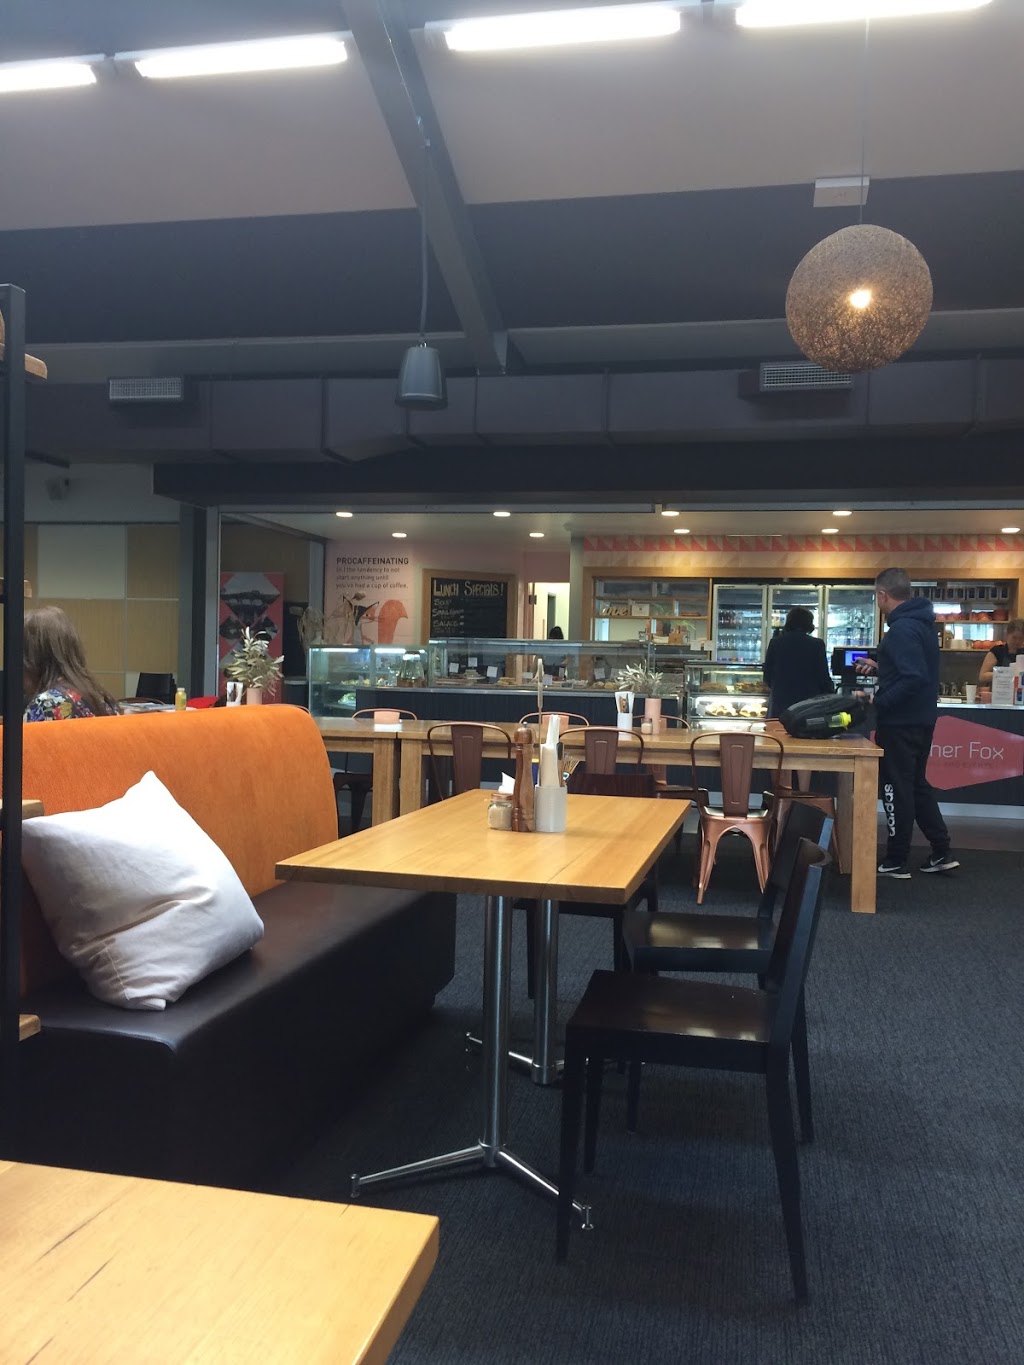 Brother Fox Food & Hospitality | cafe | Deakin University, Building, H, Cafeteria Ln, Warrnambool VIC 3280, Australia